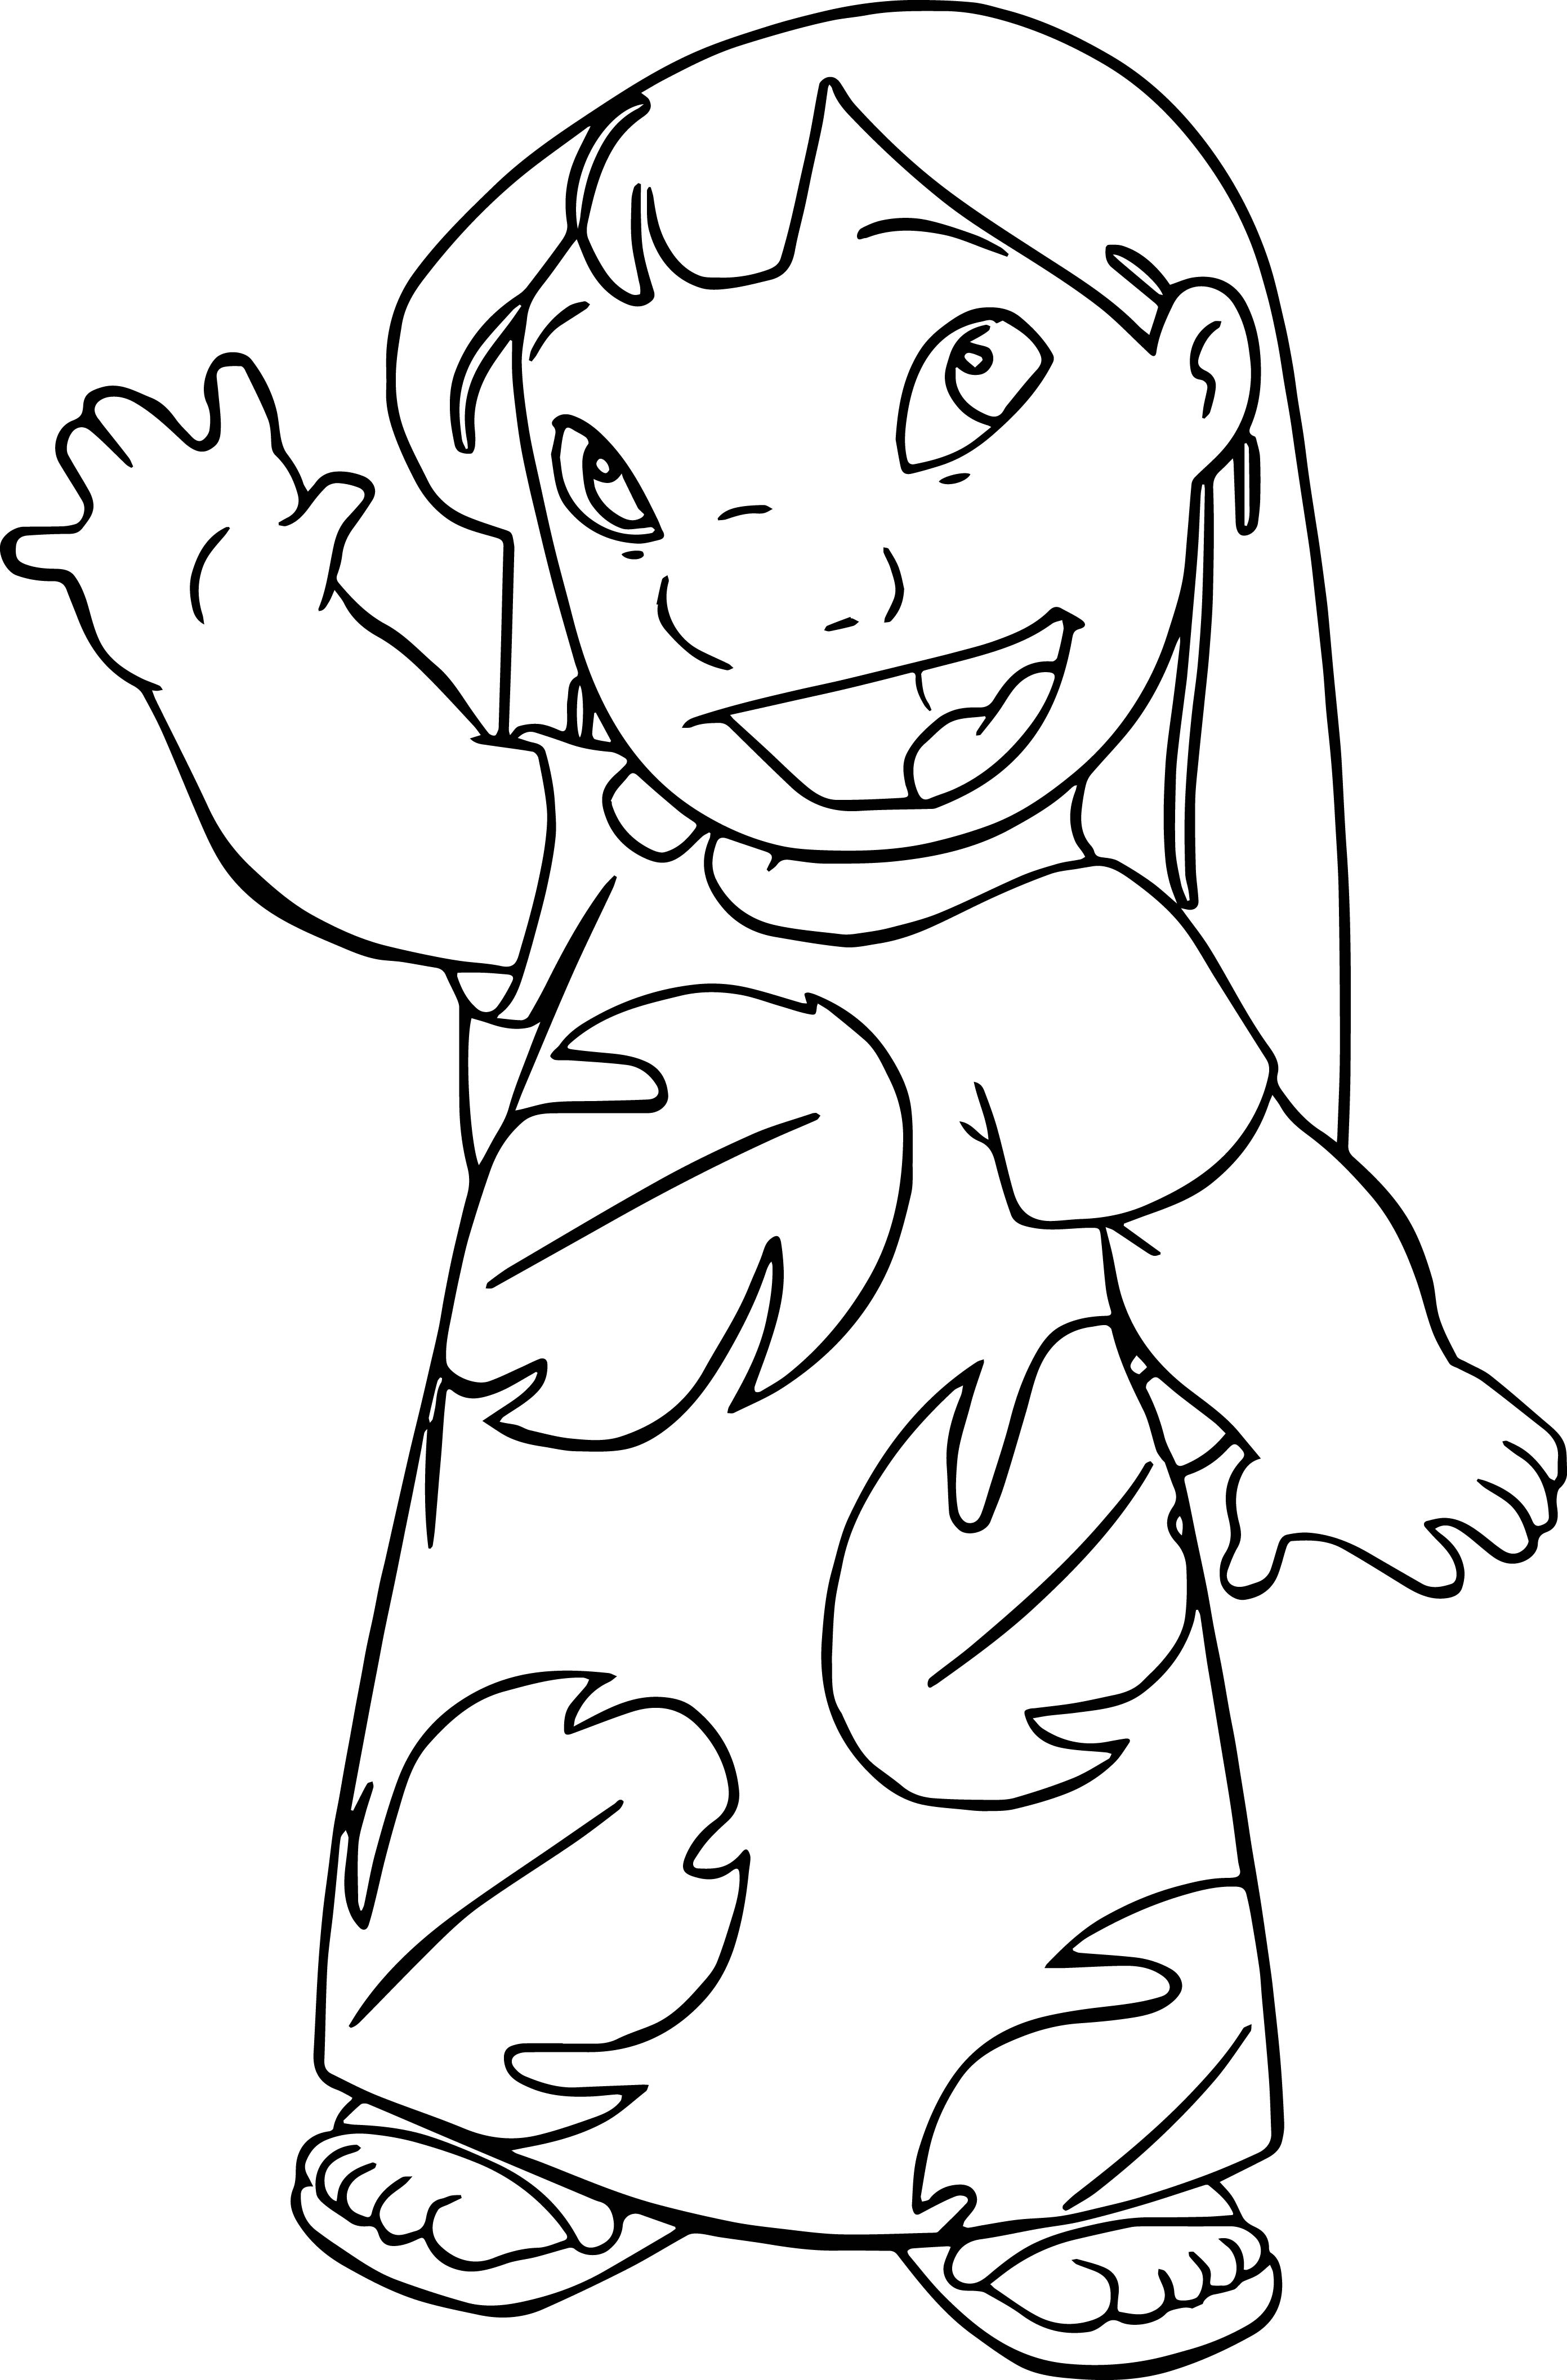 Lilo And Stitch Coloring Book
 Lilo And Stitch Coloring Pages